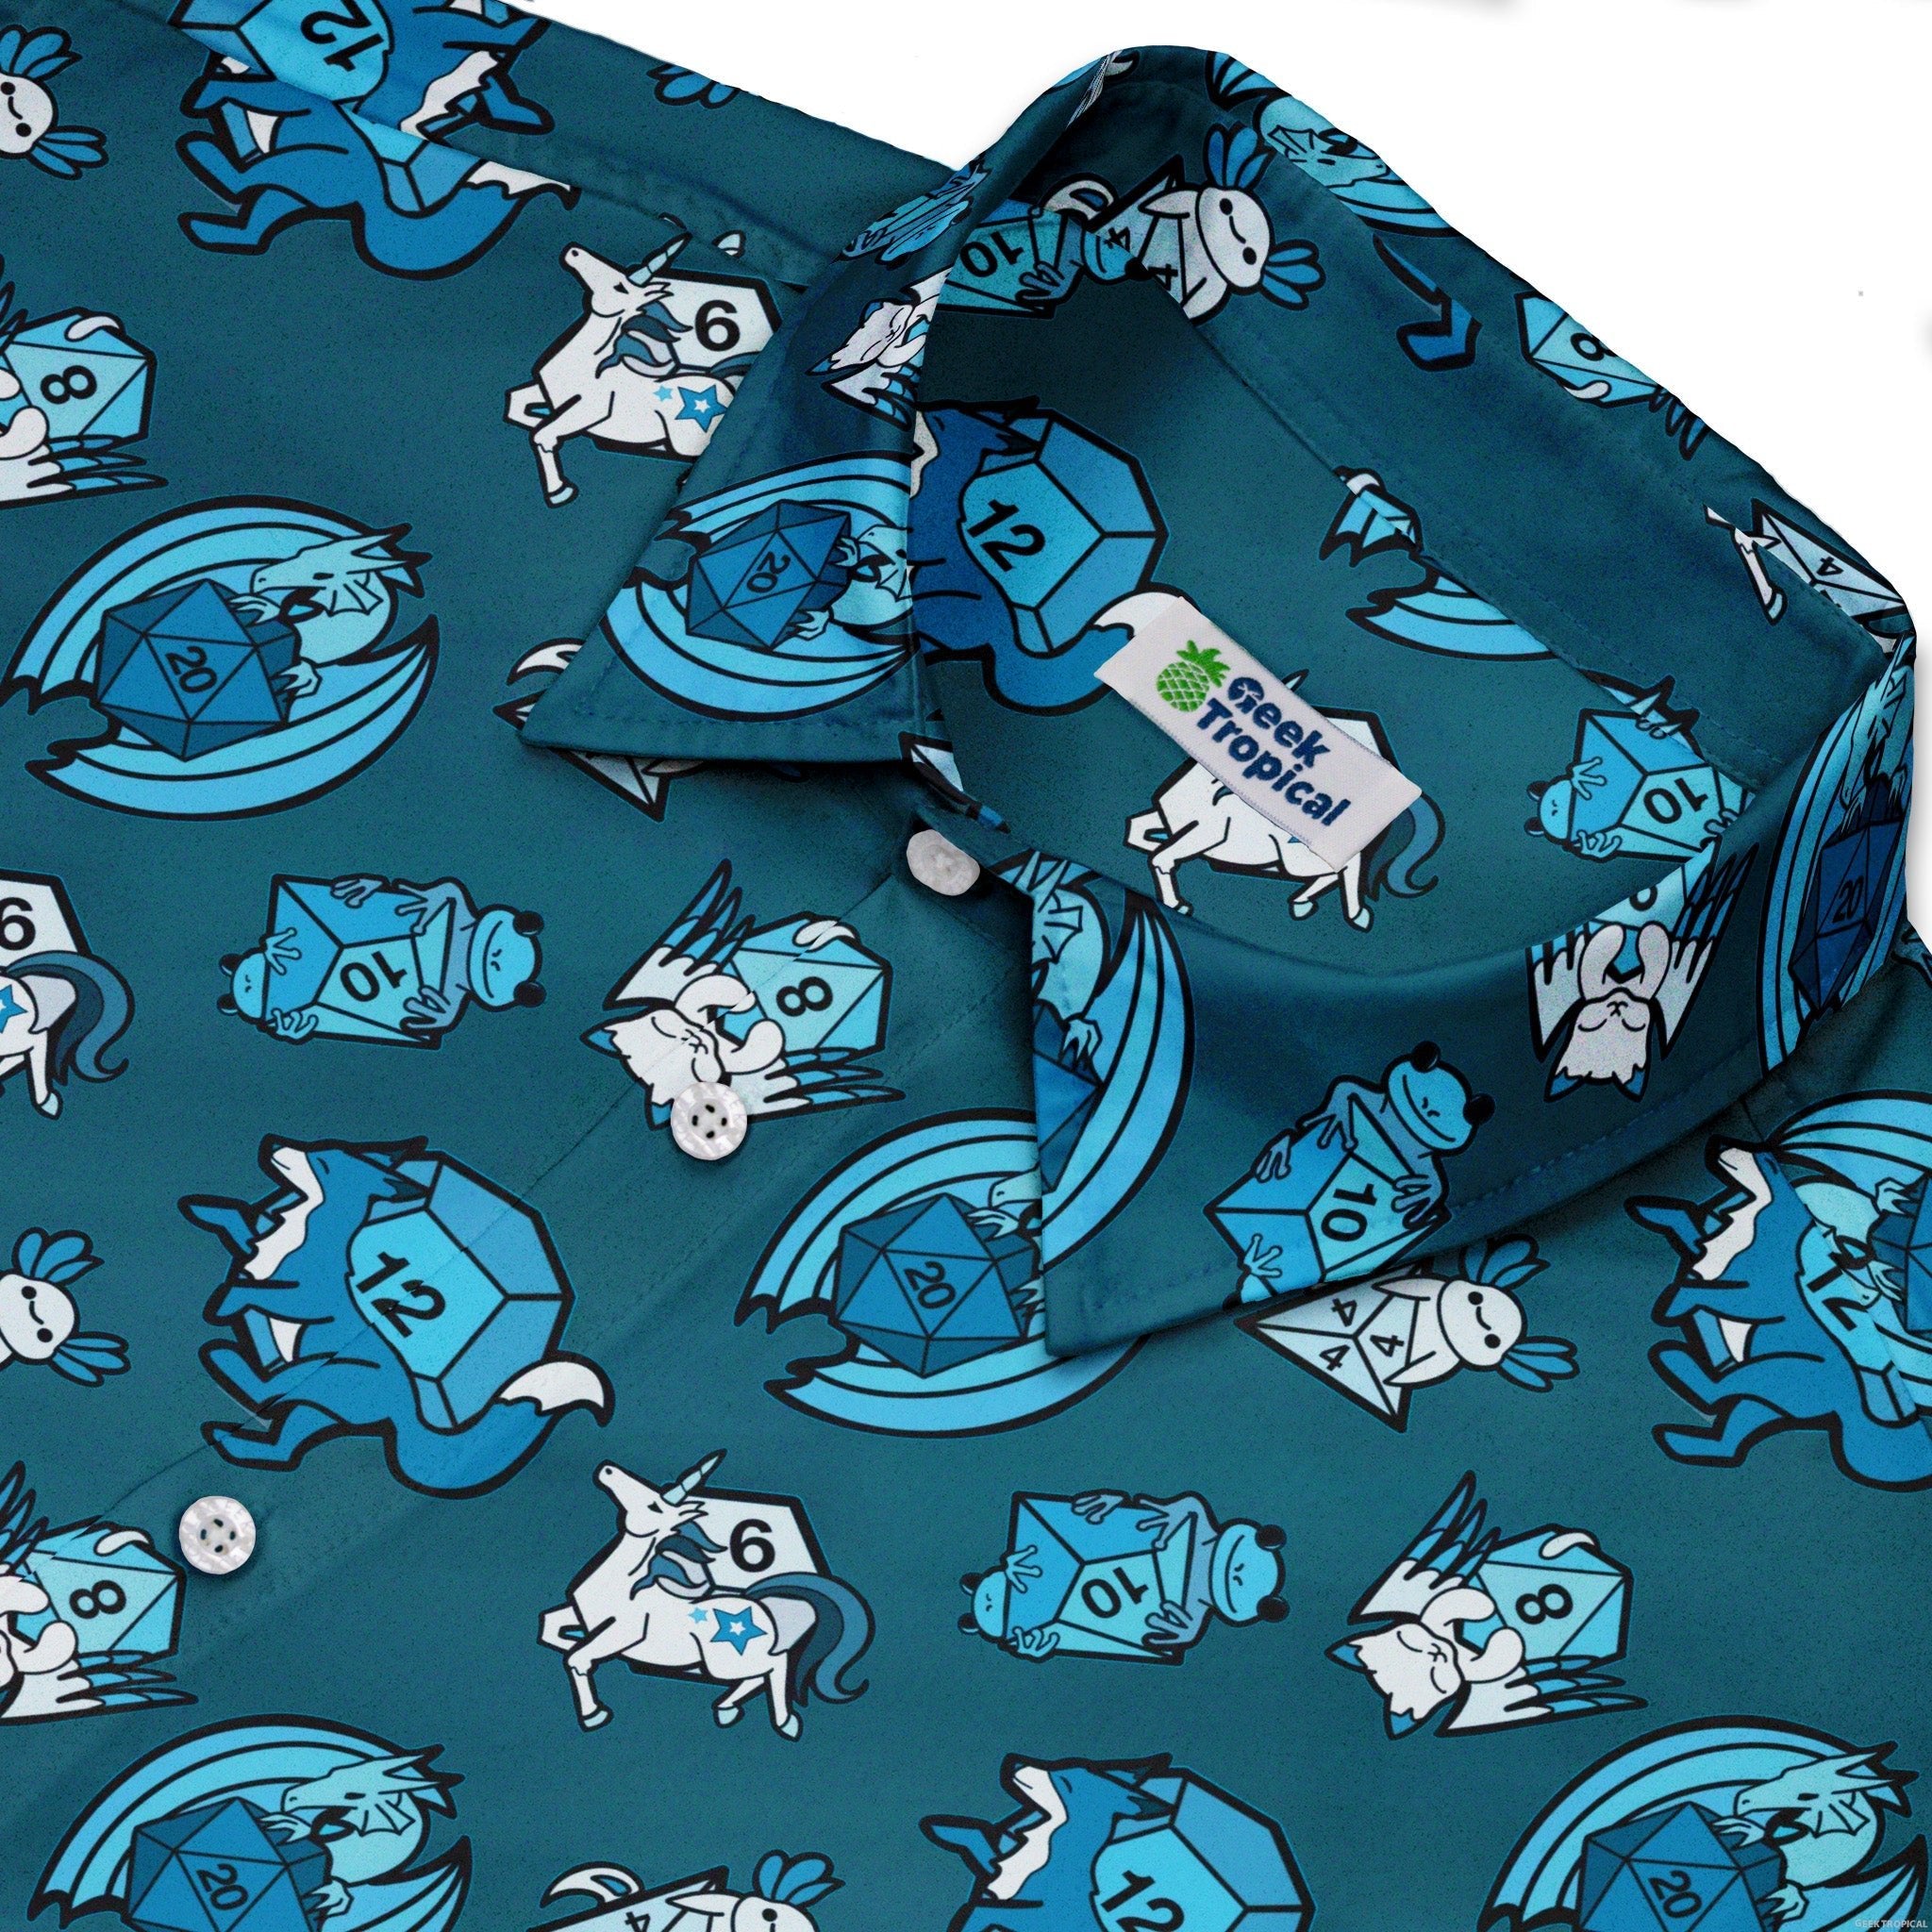 Dice Critters Blue Monochrome Button Up Shirt - adult sizing - Animal Patterns - Designed by Rose Khan